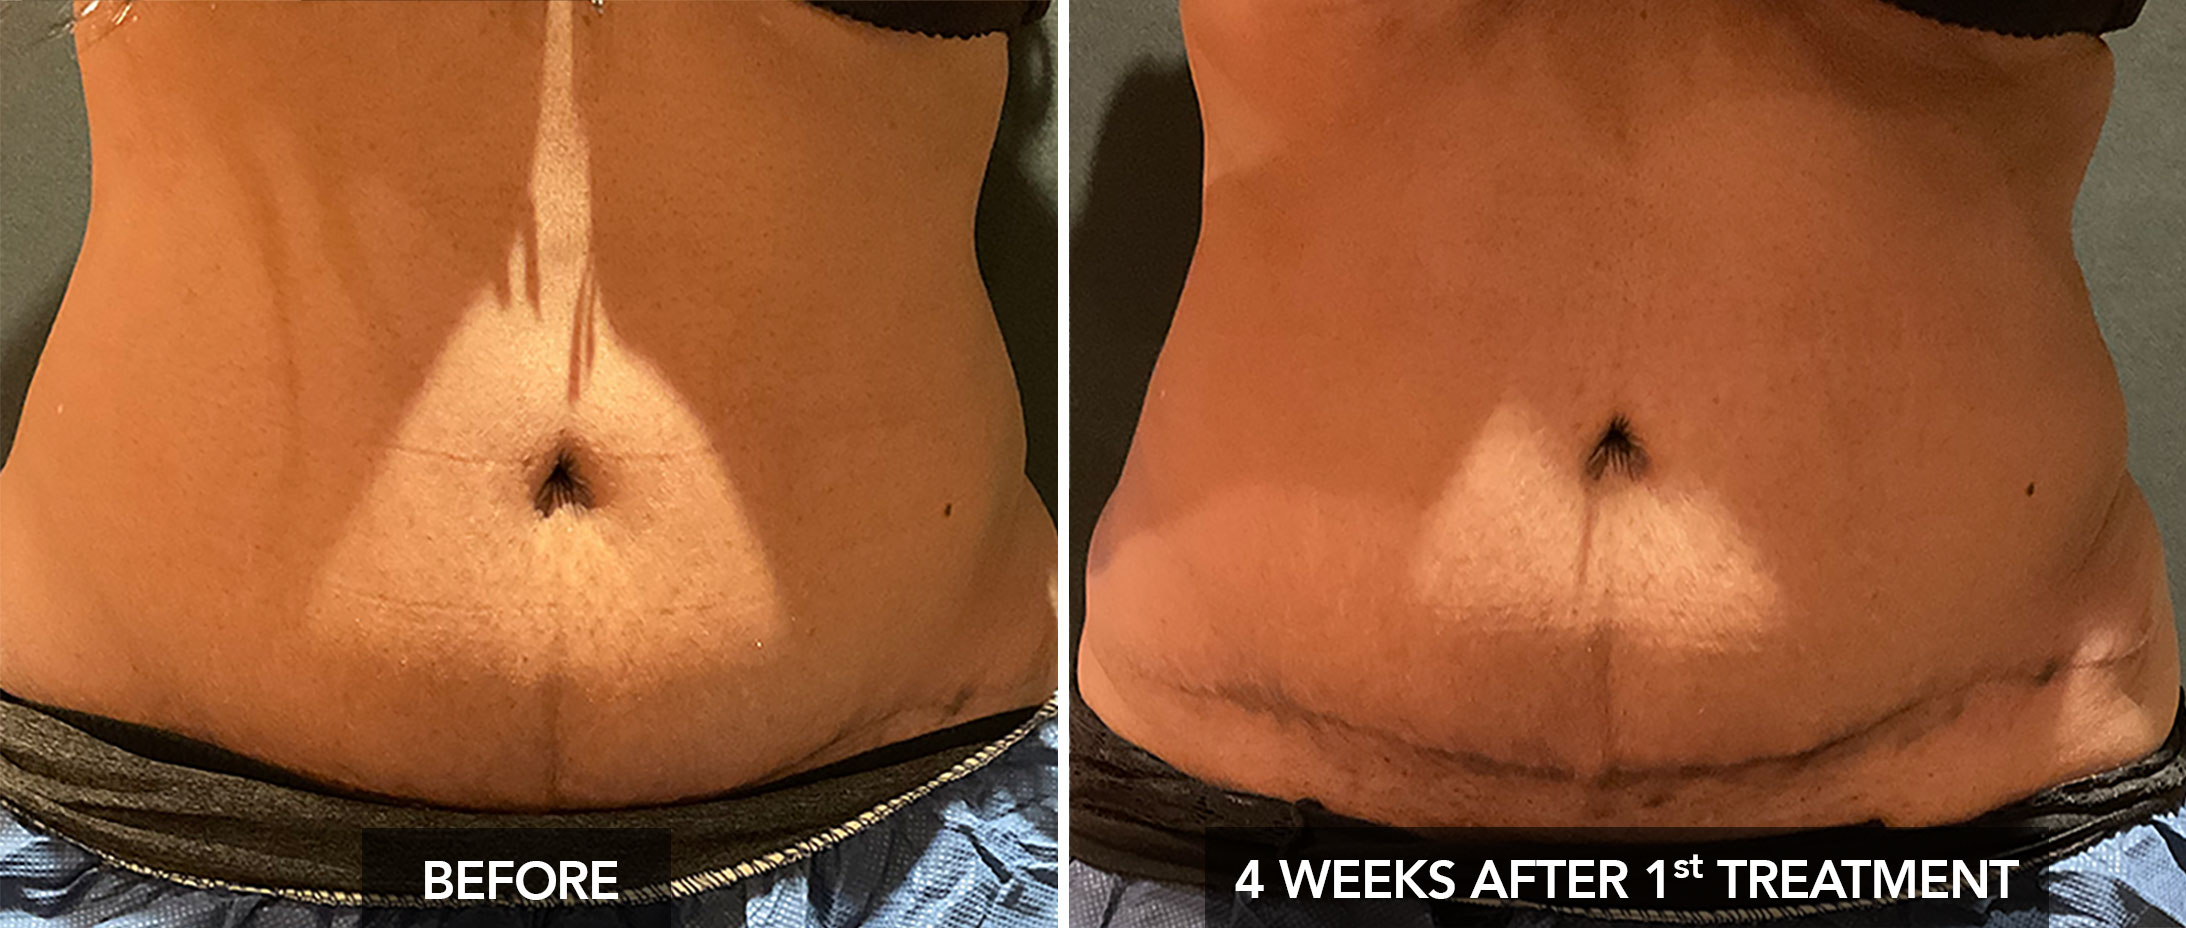 Abdomen Before & After Coolsculpting